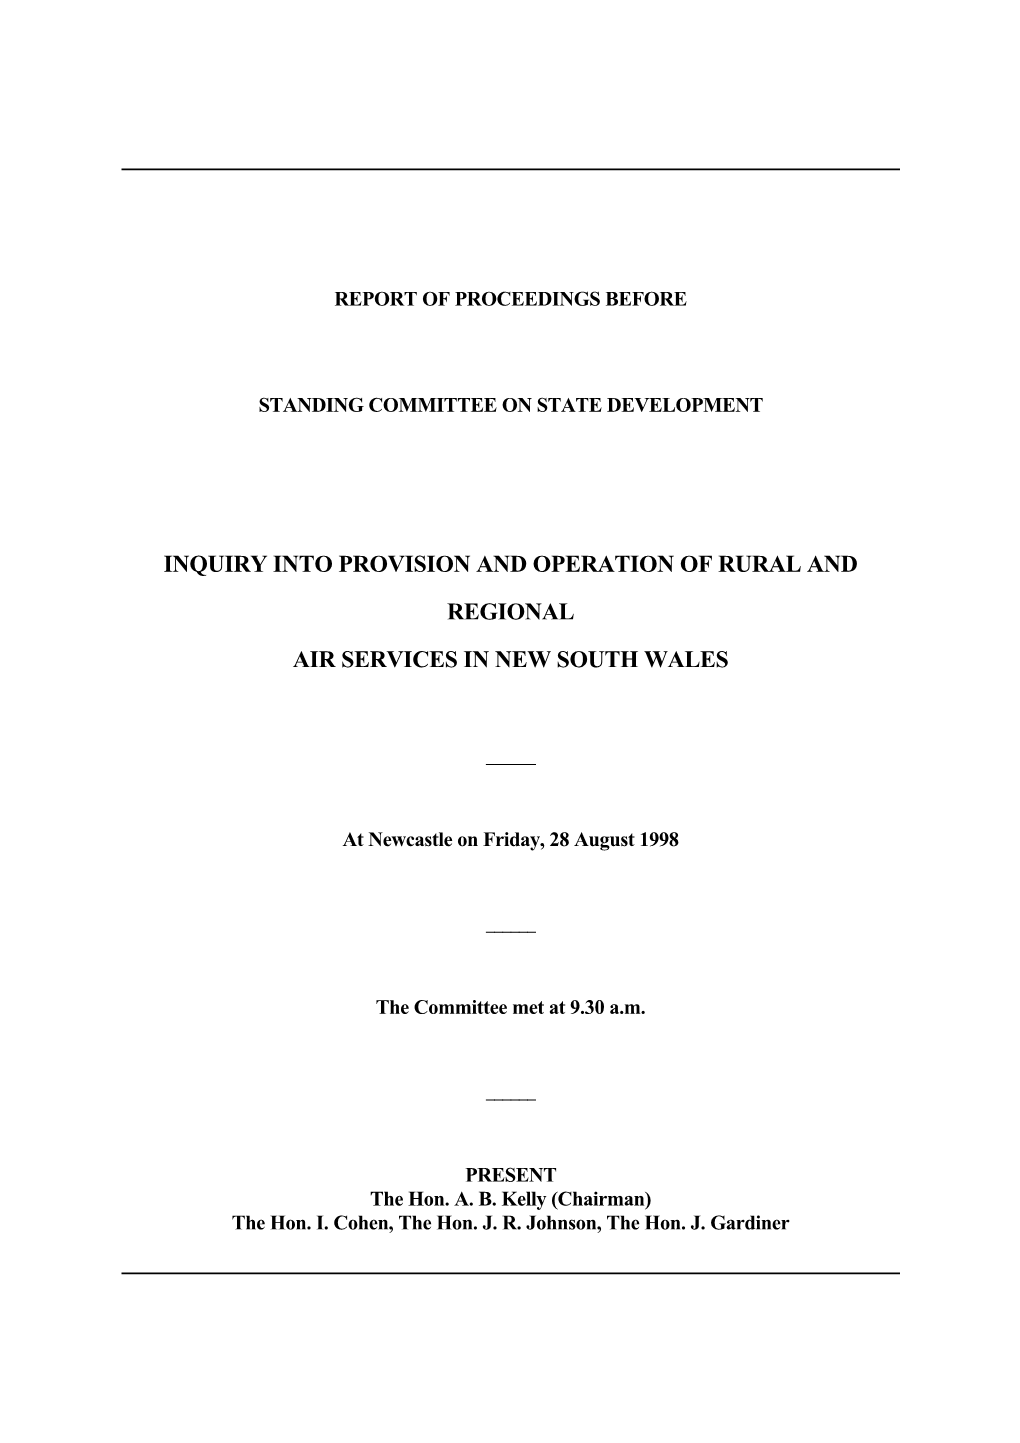 Inquiry Into Provision and Operation of Rural and Regional Air Services in New South Wales